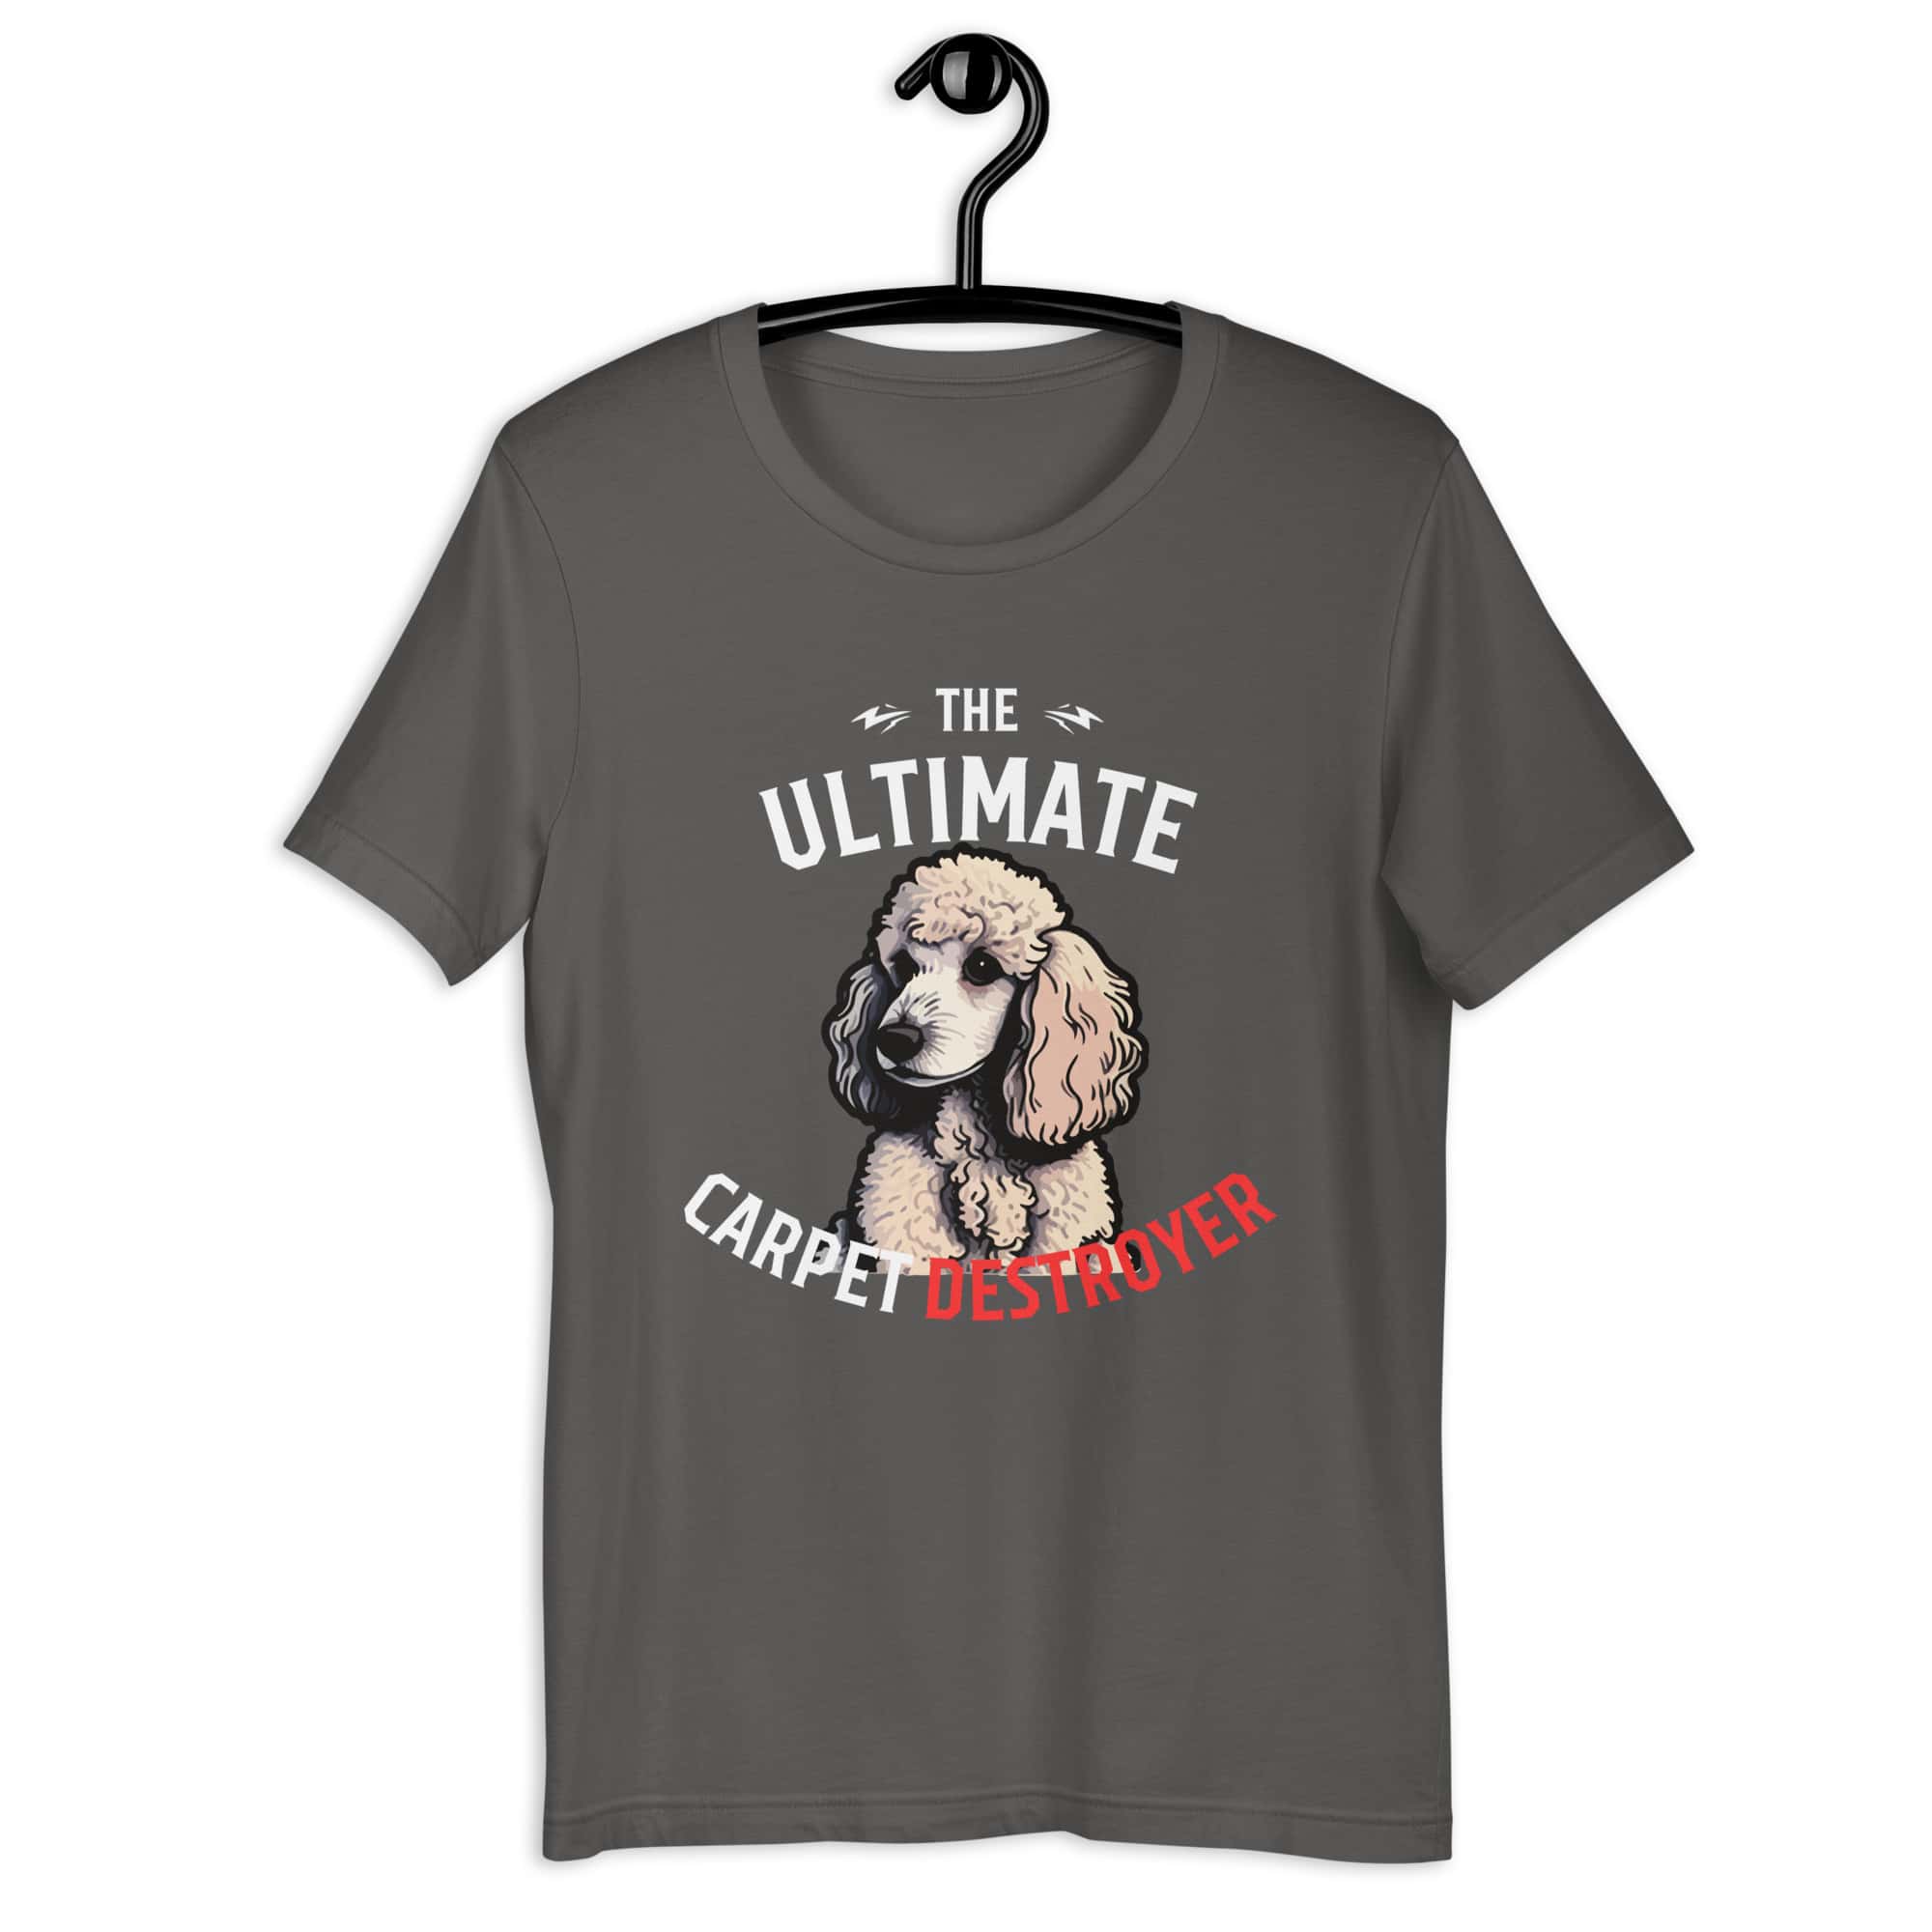 The Ultimate Carpet Destroyer Funny Poodle Unisex T-Shirt gray